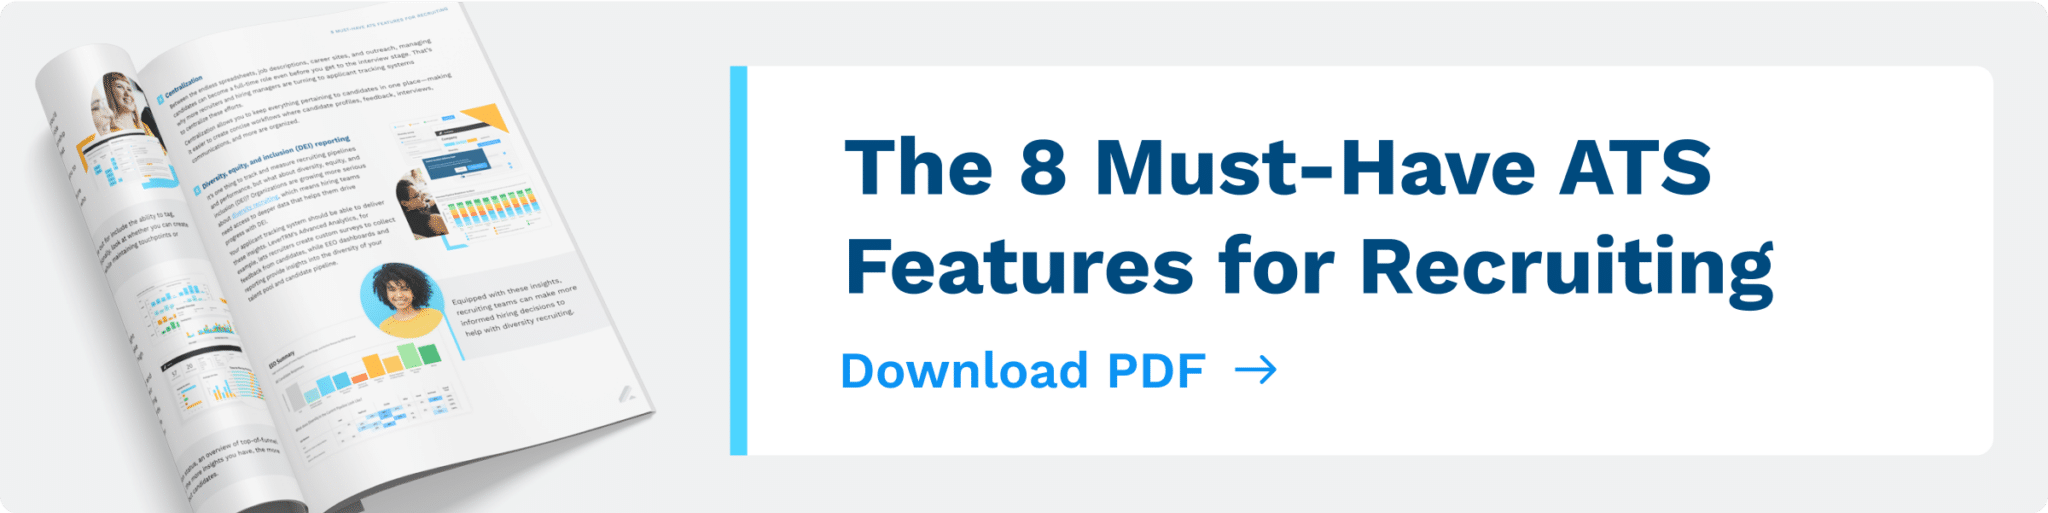 8 must have ATS features for recruiting PDF